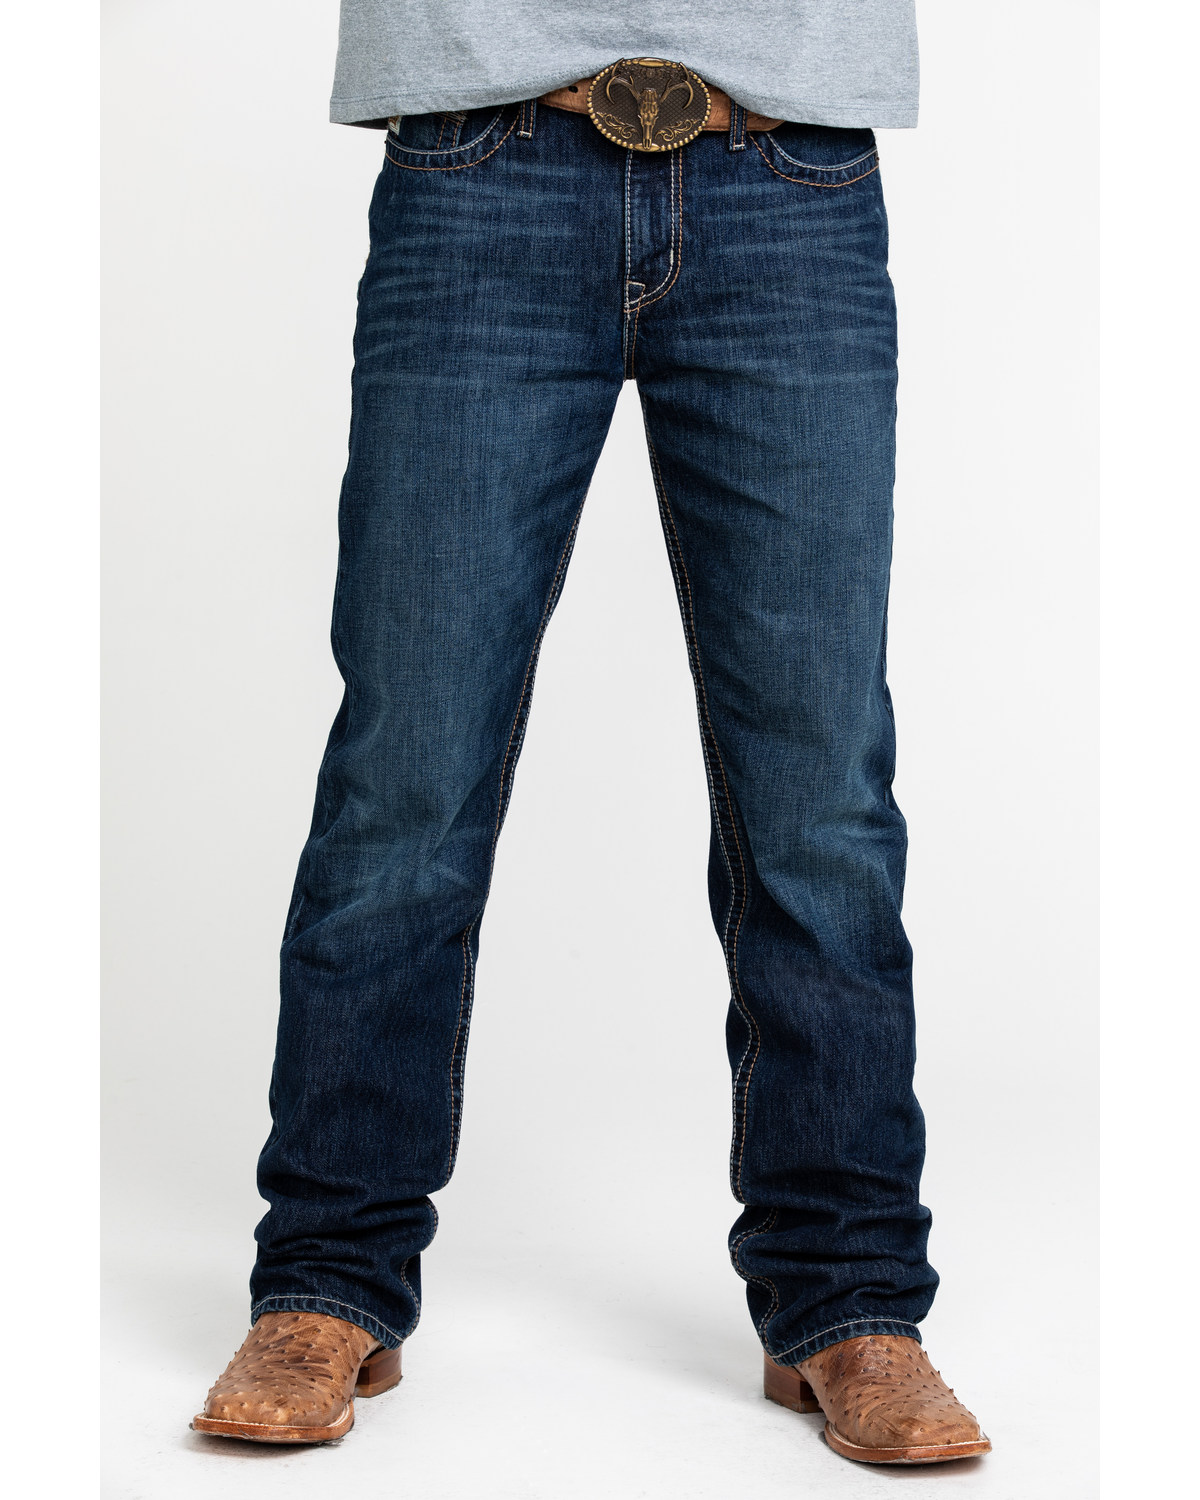 Cinch Men's Grant Dark Stone Mid Relaxed Boot Jeans | Boot Barn